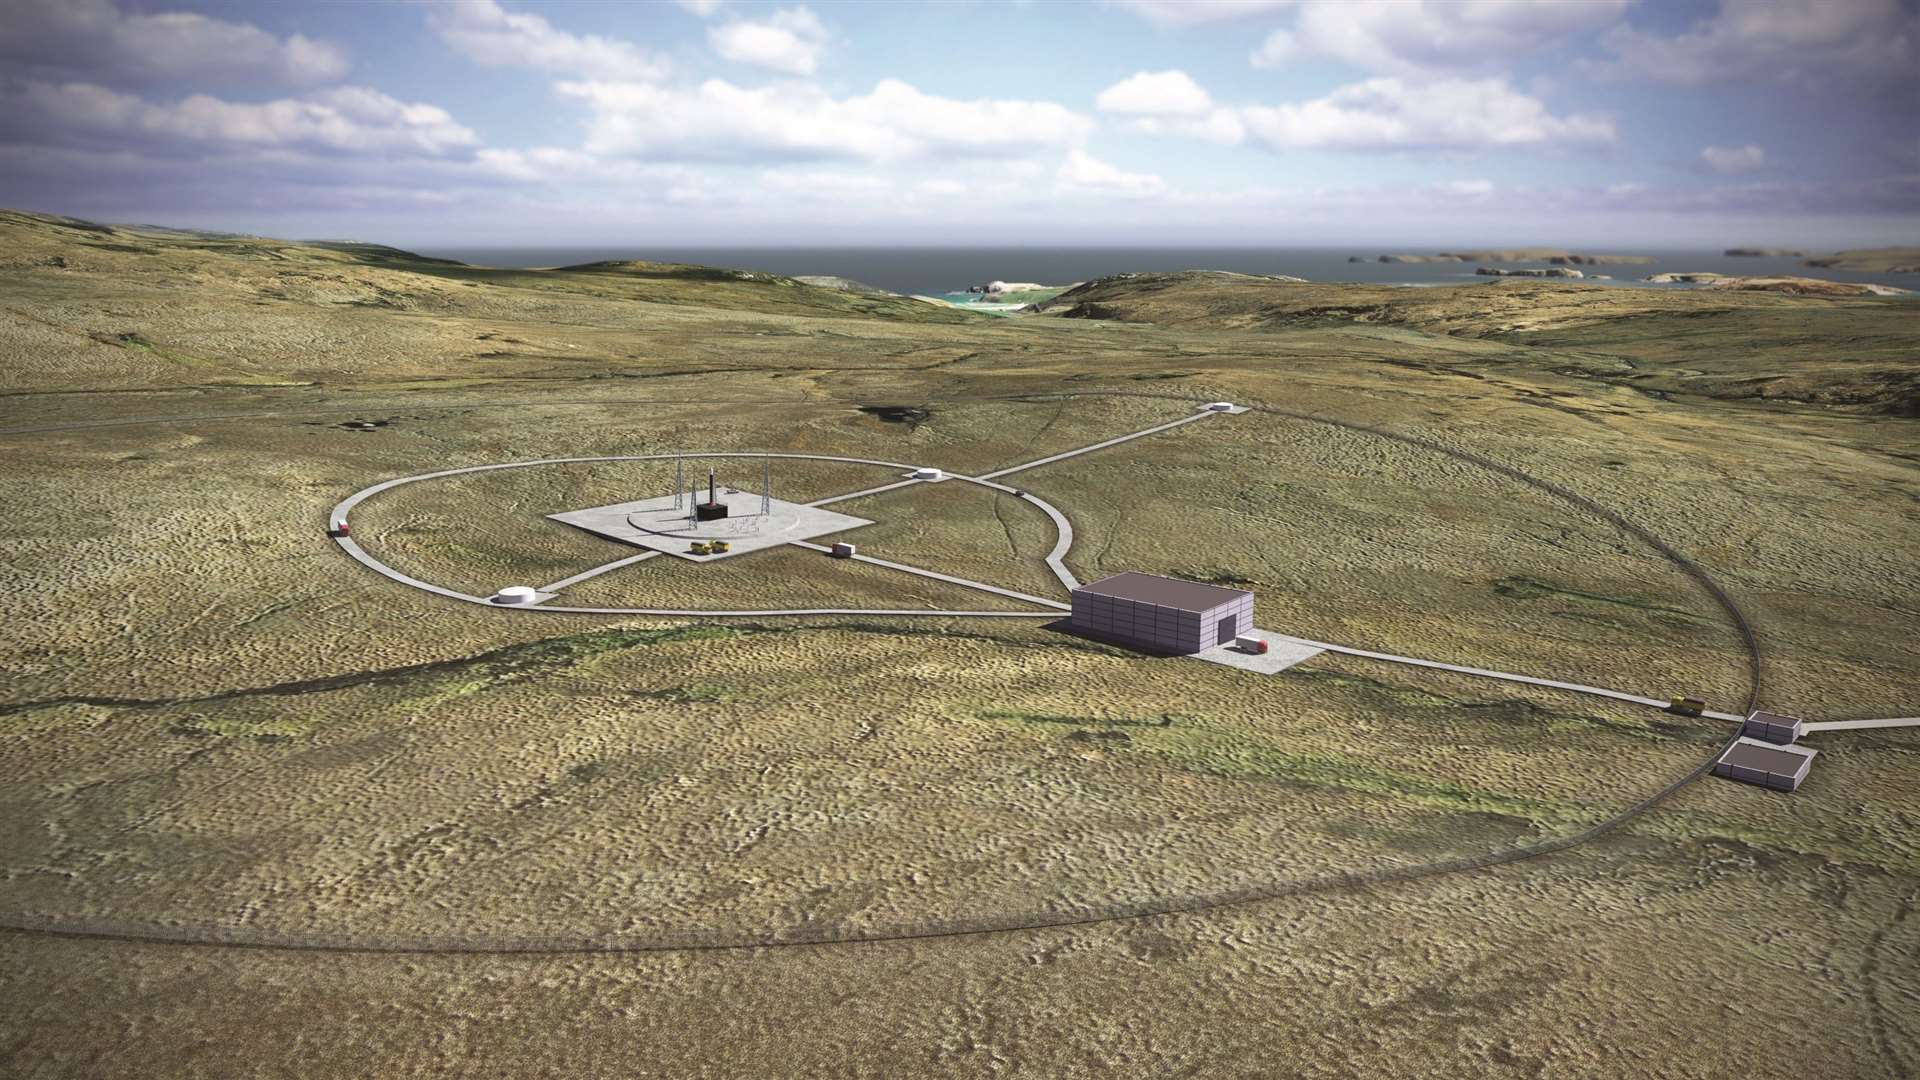 Access to the land surrounding the Sutherland Spaceport is likely to be restricted during launches.